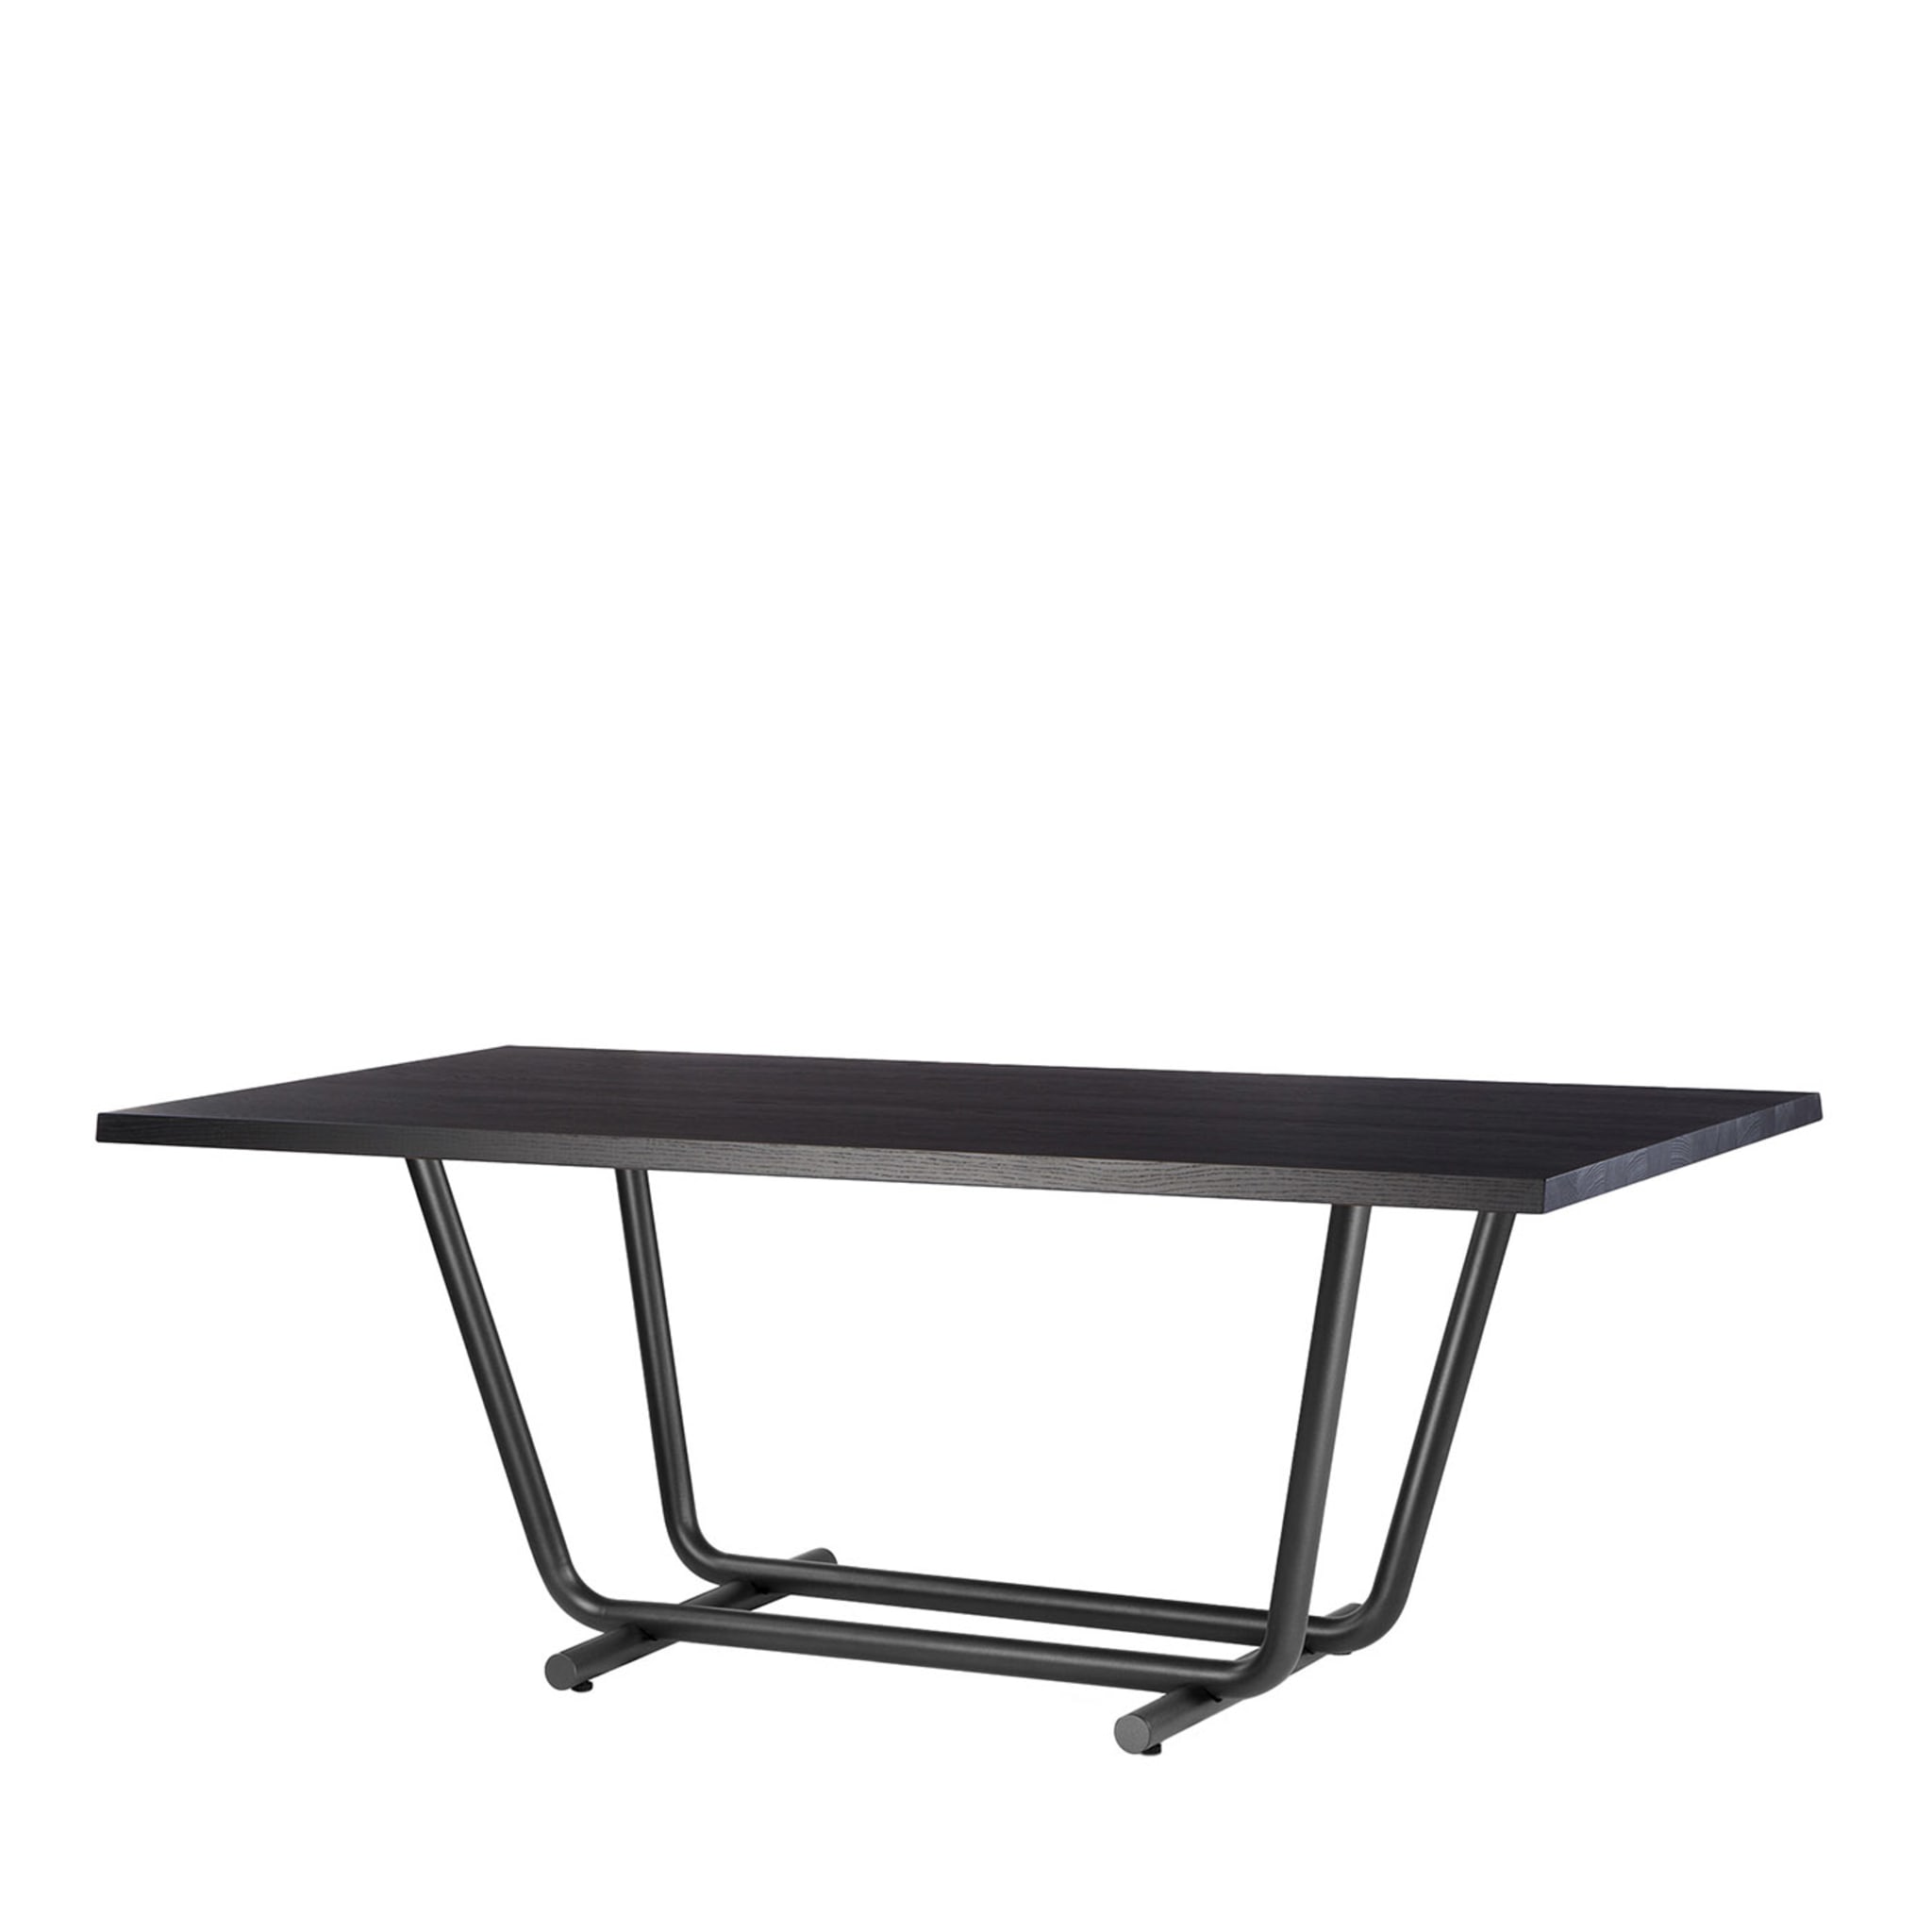 Paloalto Anthracite Dining Table - Main view